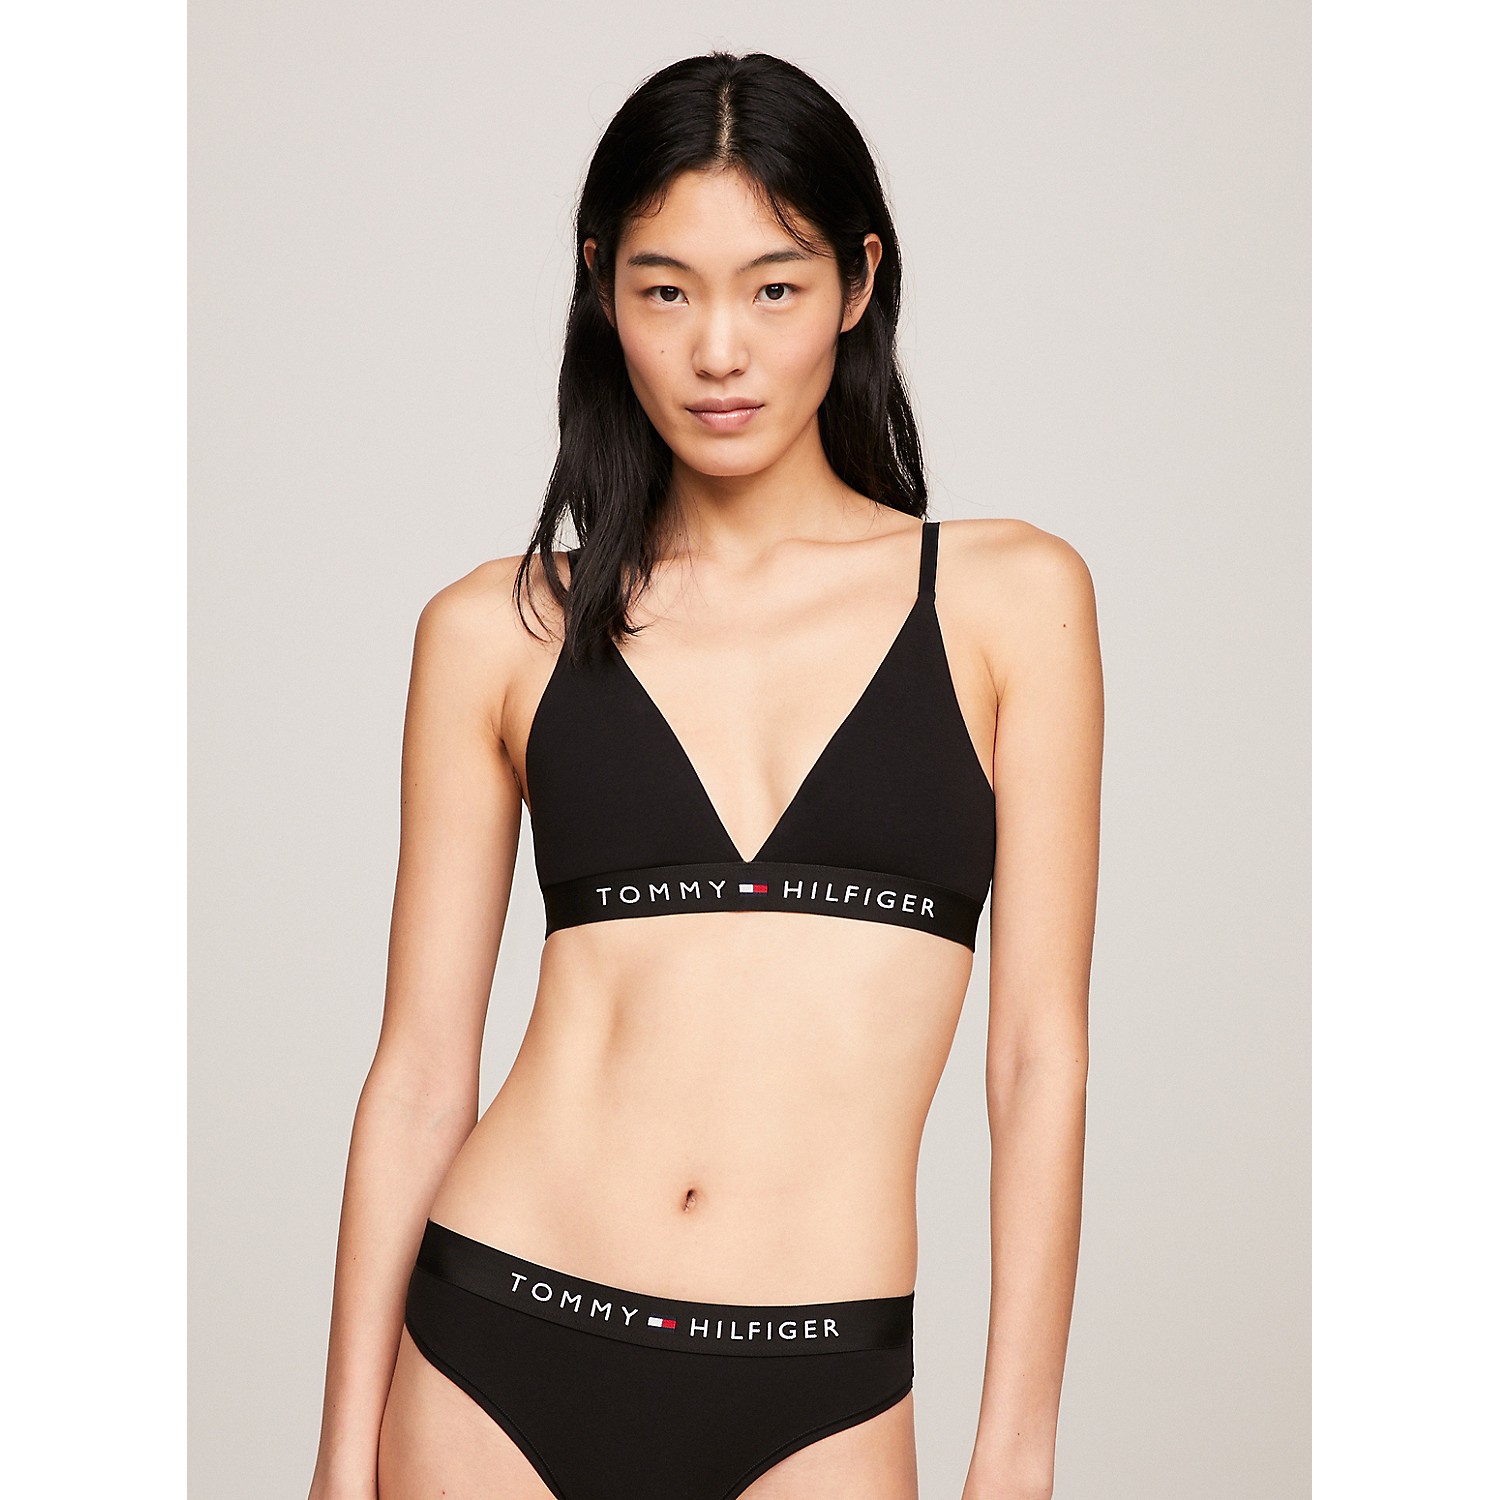 TOMMY HILFIGER Flag Unlined Triangle Bralette